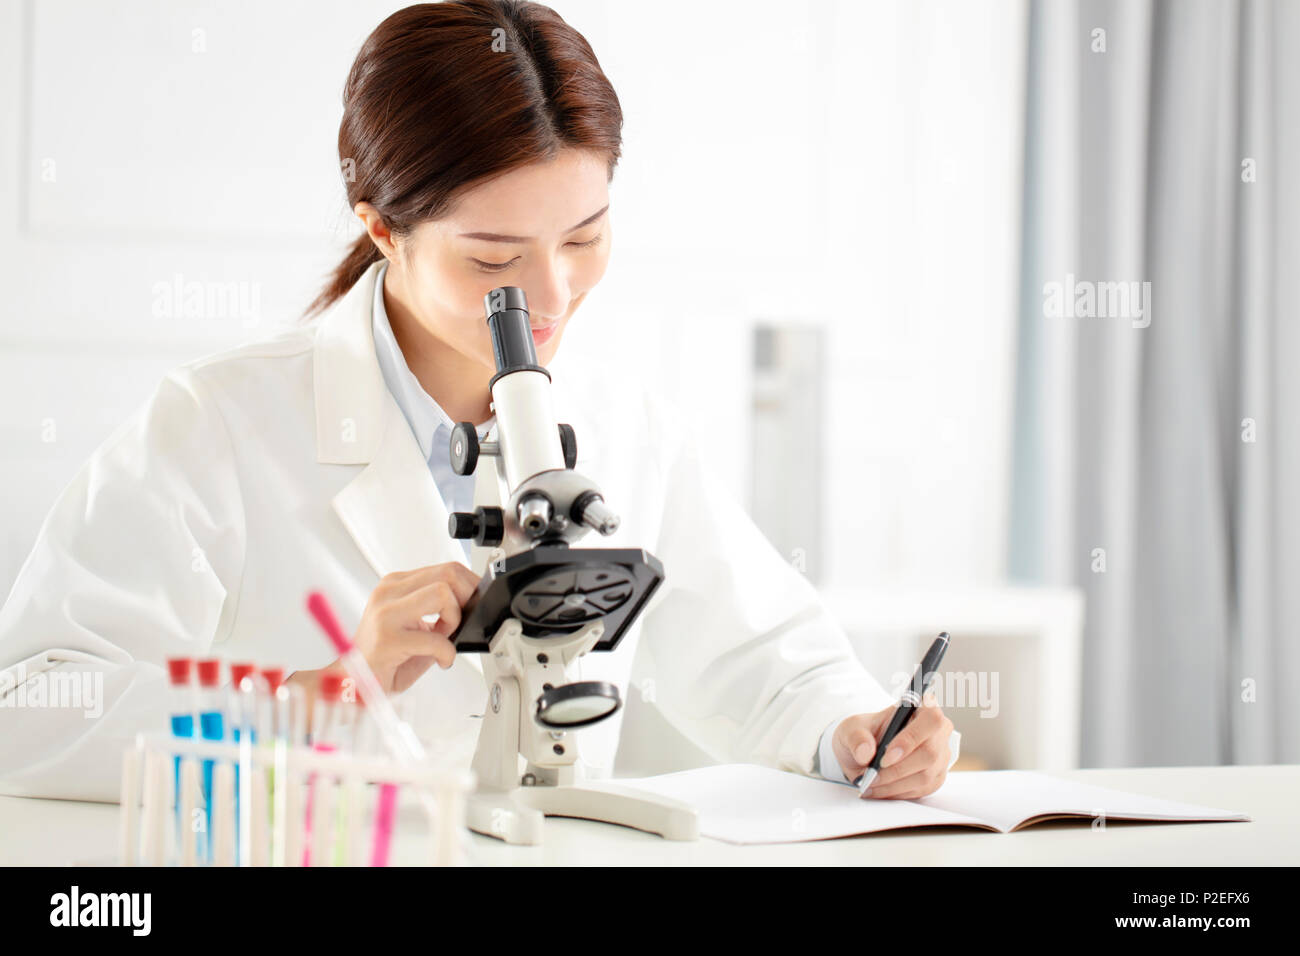 female medical or scientific researcher working in lab Stock Photo